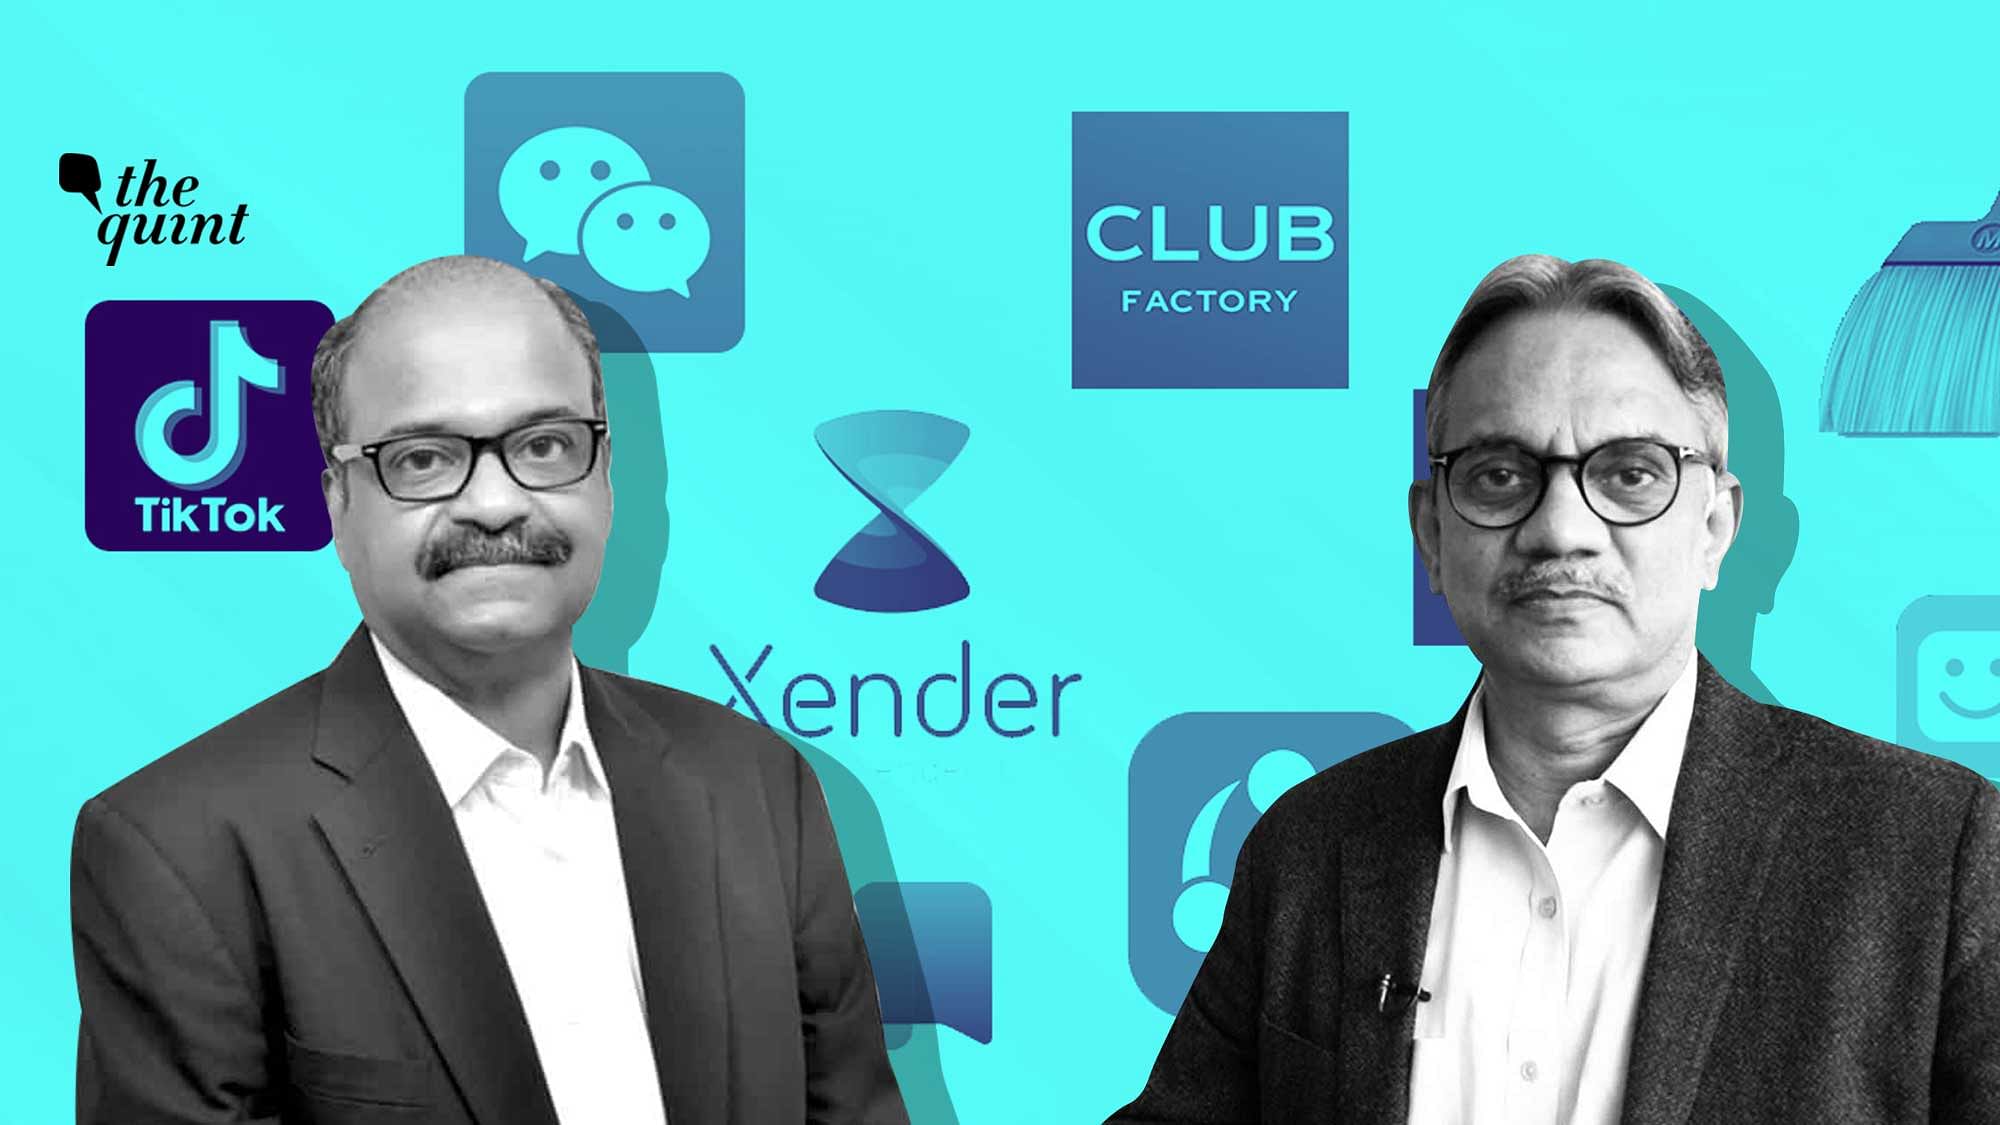 Sanjay Pugalia, The Quint’s editorial director, spoke with Blaise Fernandes, director, Gateway House on the implications of the ban on Chinese apps and whether the ban affects stakeholders.